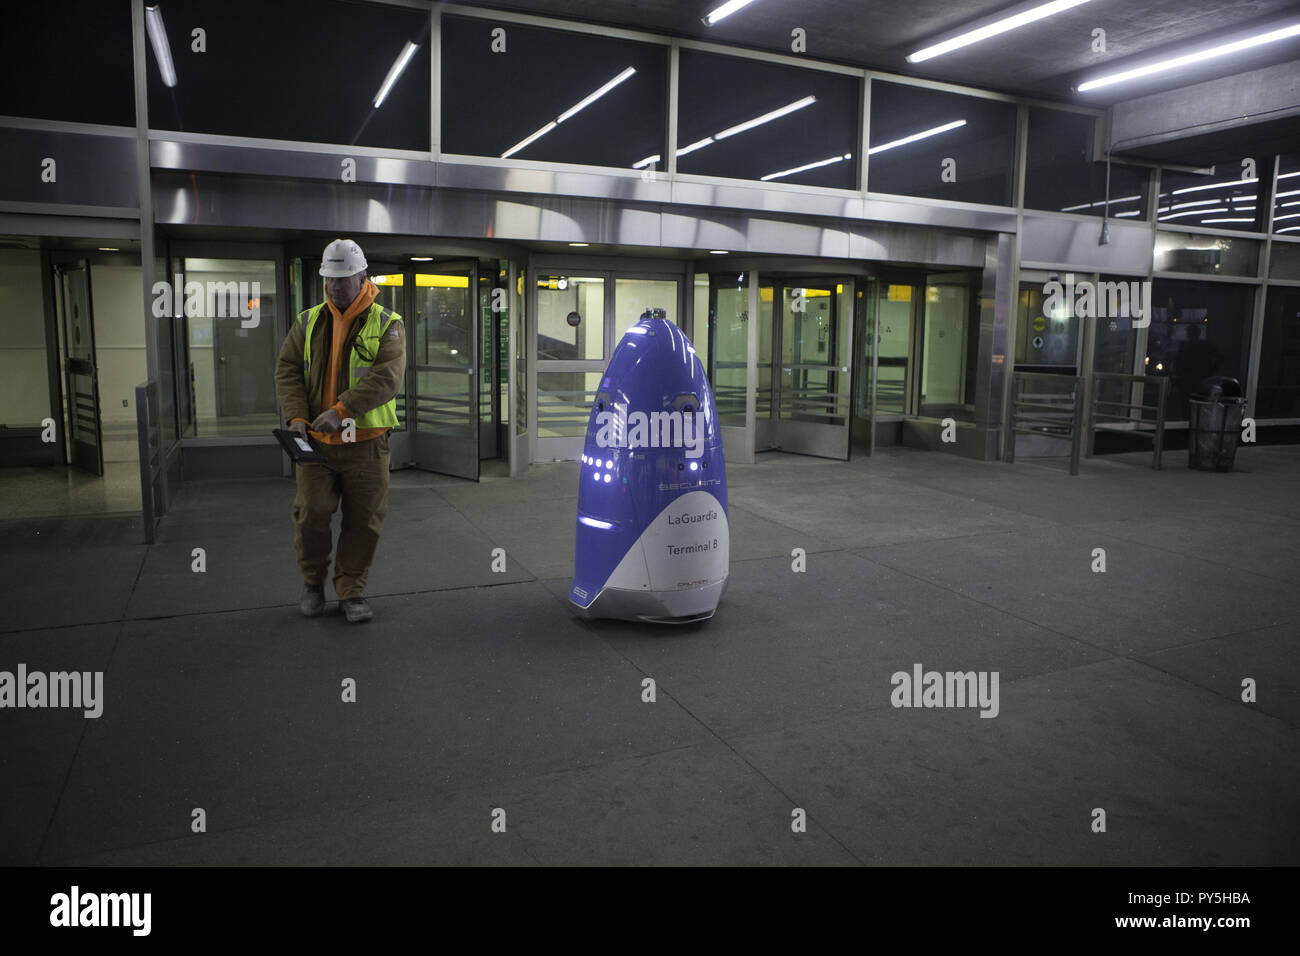 Queens, New York, USA. 24th Oct, 2018. KNIGHTSCOPE'S K5 ROBOT is shown outside baggage claim at Terminal B at LaGuardia Airport in Queens, New York. The K5 security units records everything with it's cameras, microphones, and sensors. Source says with the introduction of 5G technology occupations such as security guards and gaming surveillance officers will be eliminated by automation. Credit: Brian Branch Price/ZUMA Wire/Alamy Live News Stock Photo